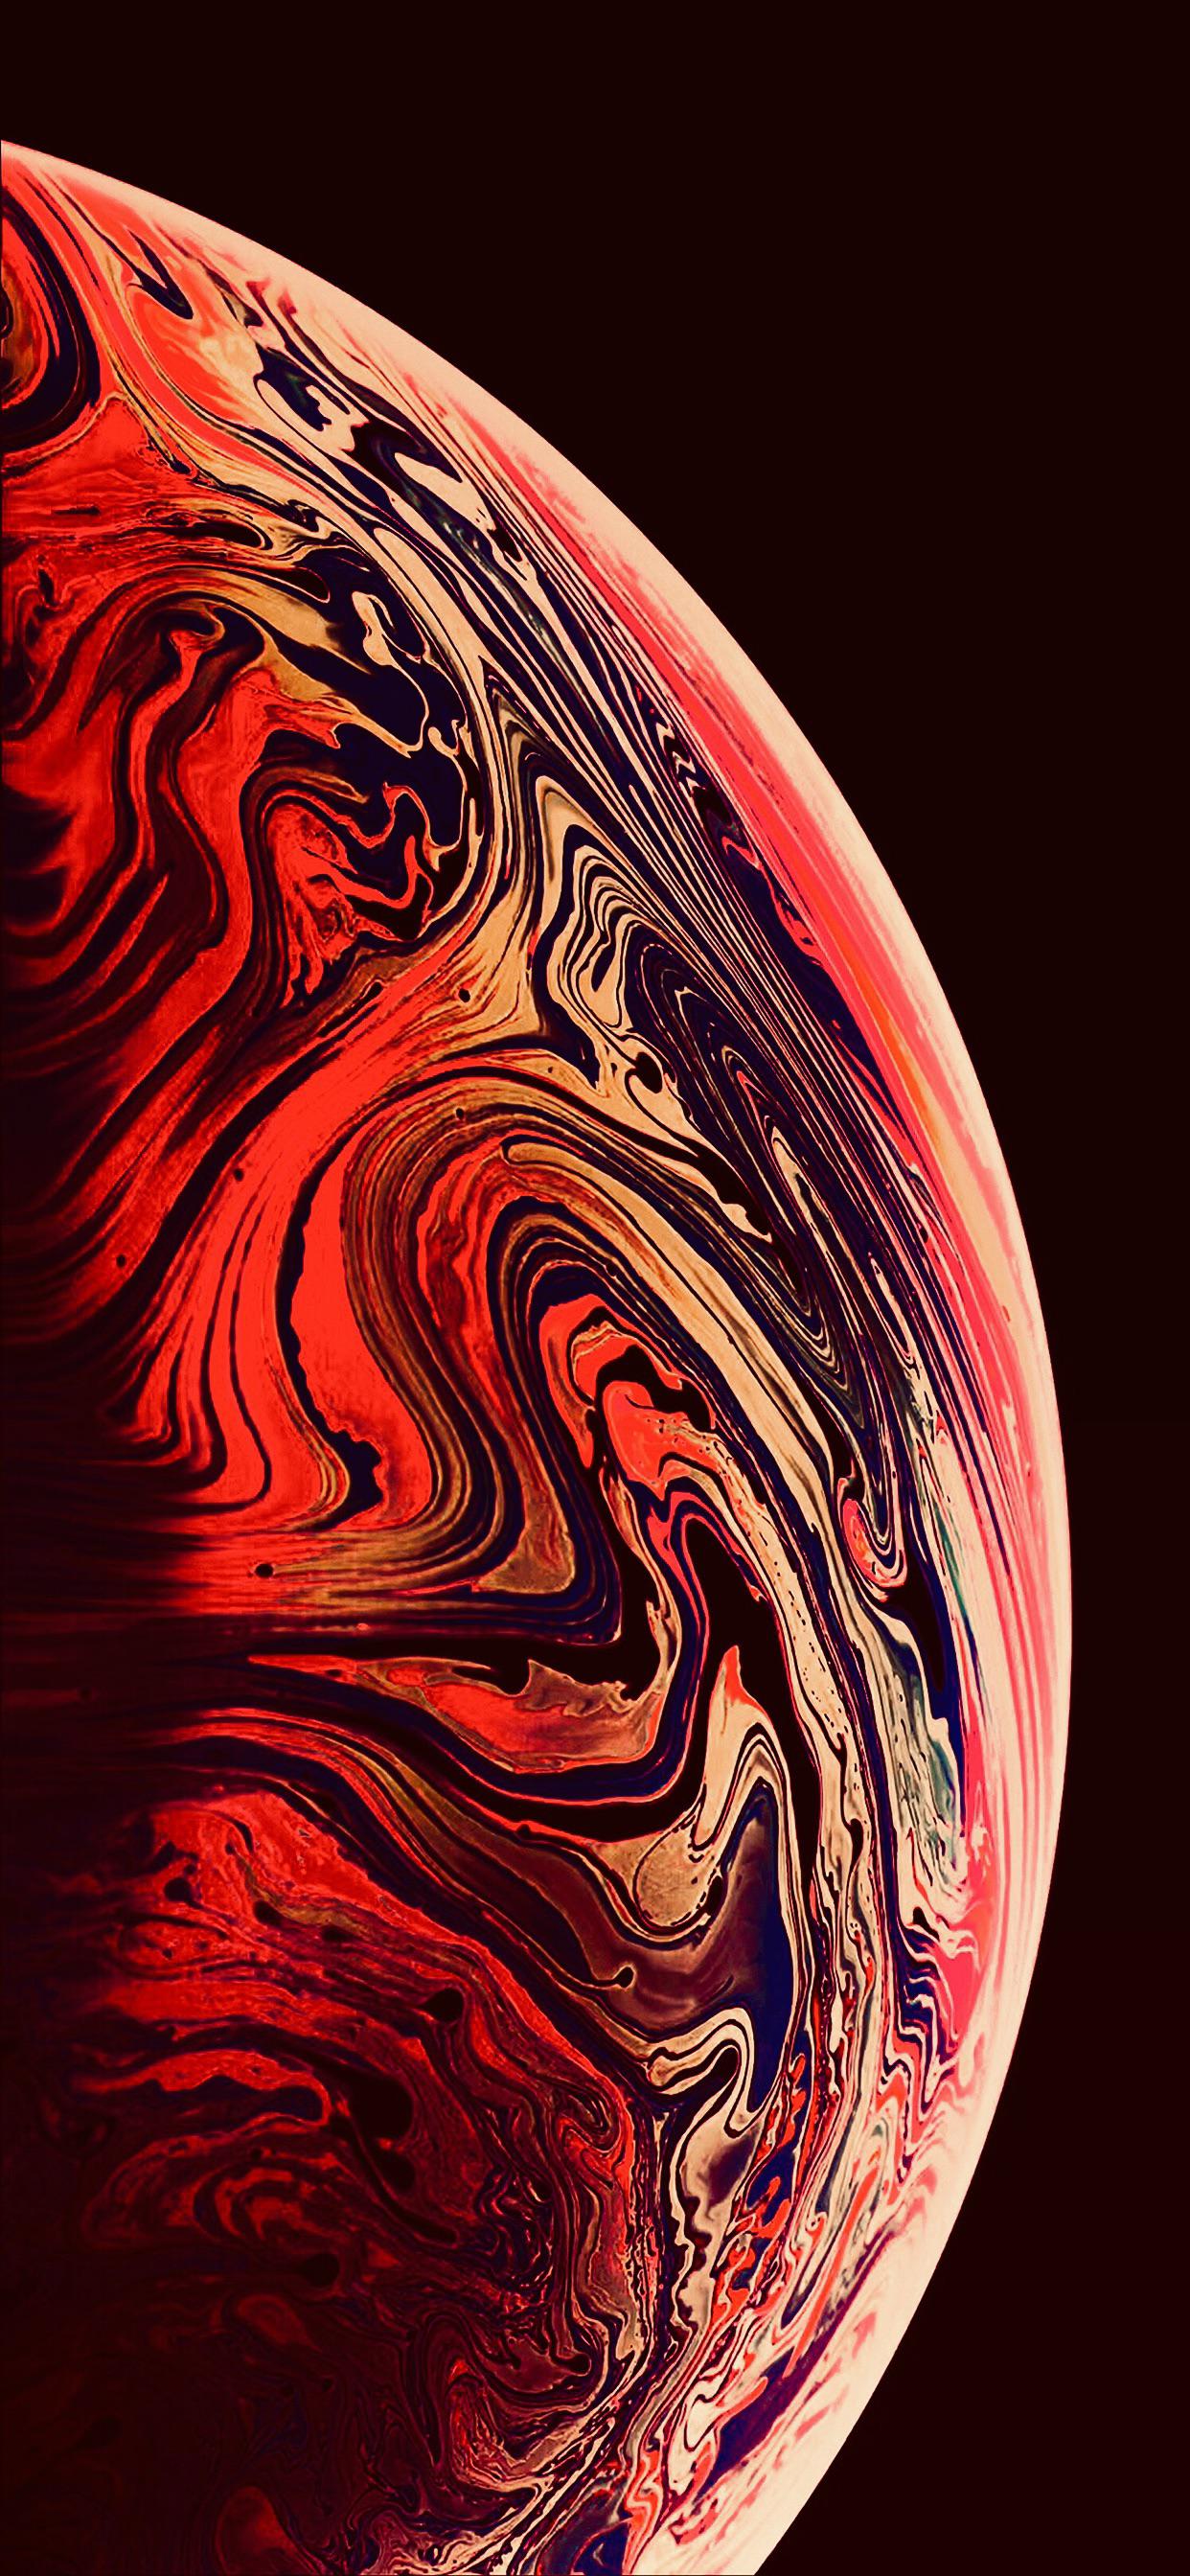 Don't know about you guys, but I enjoy the bubble wallpaper. Found